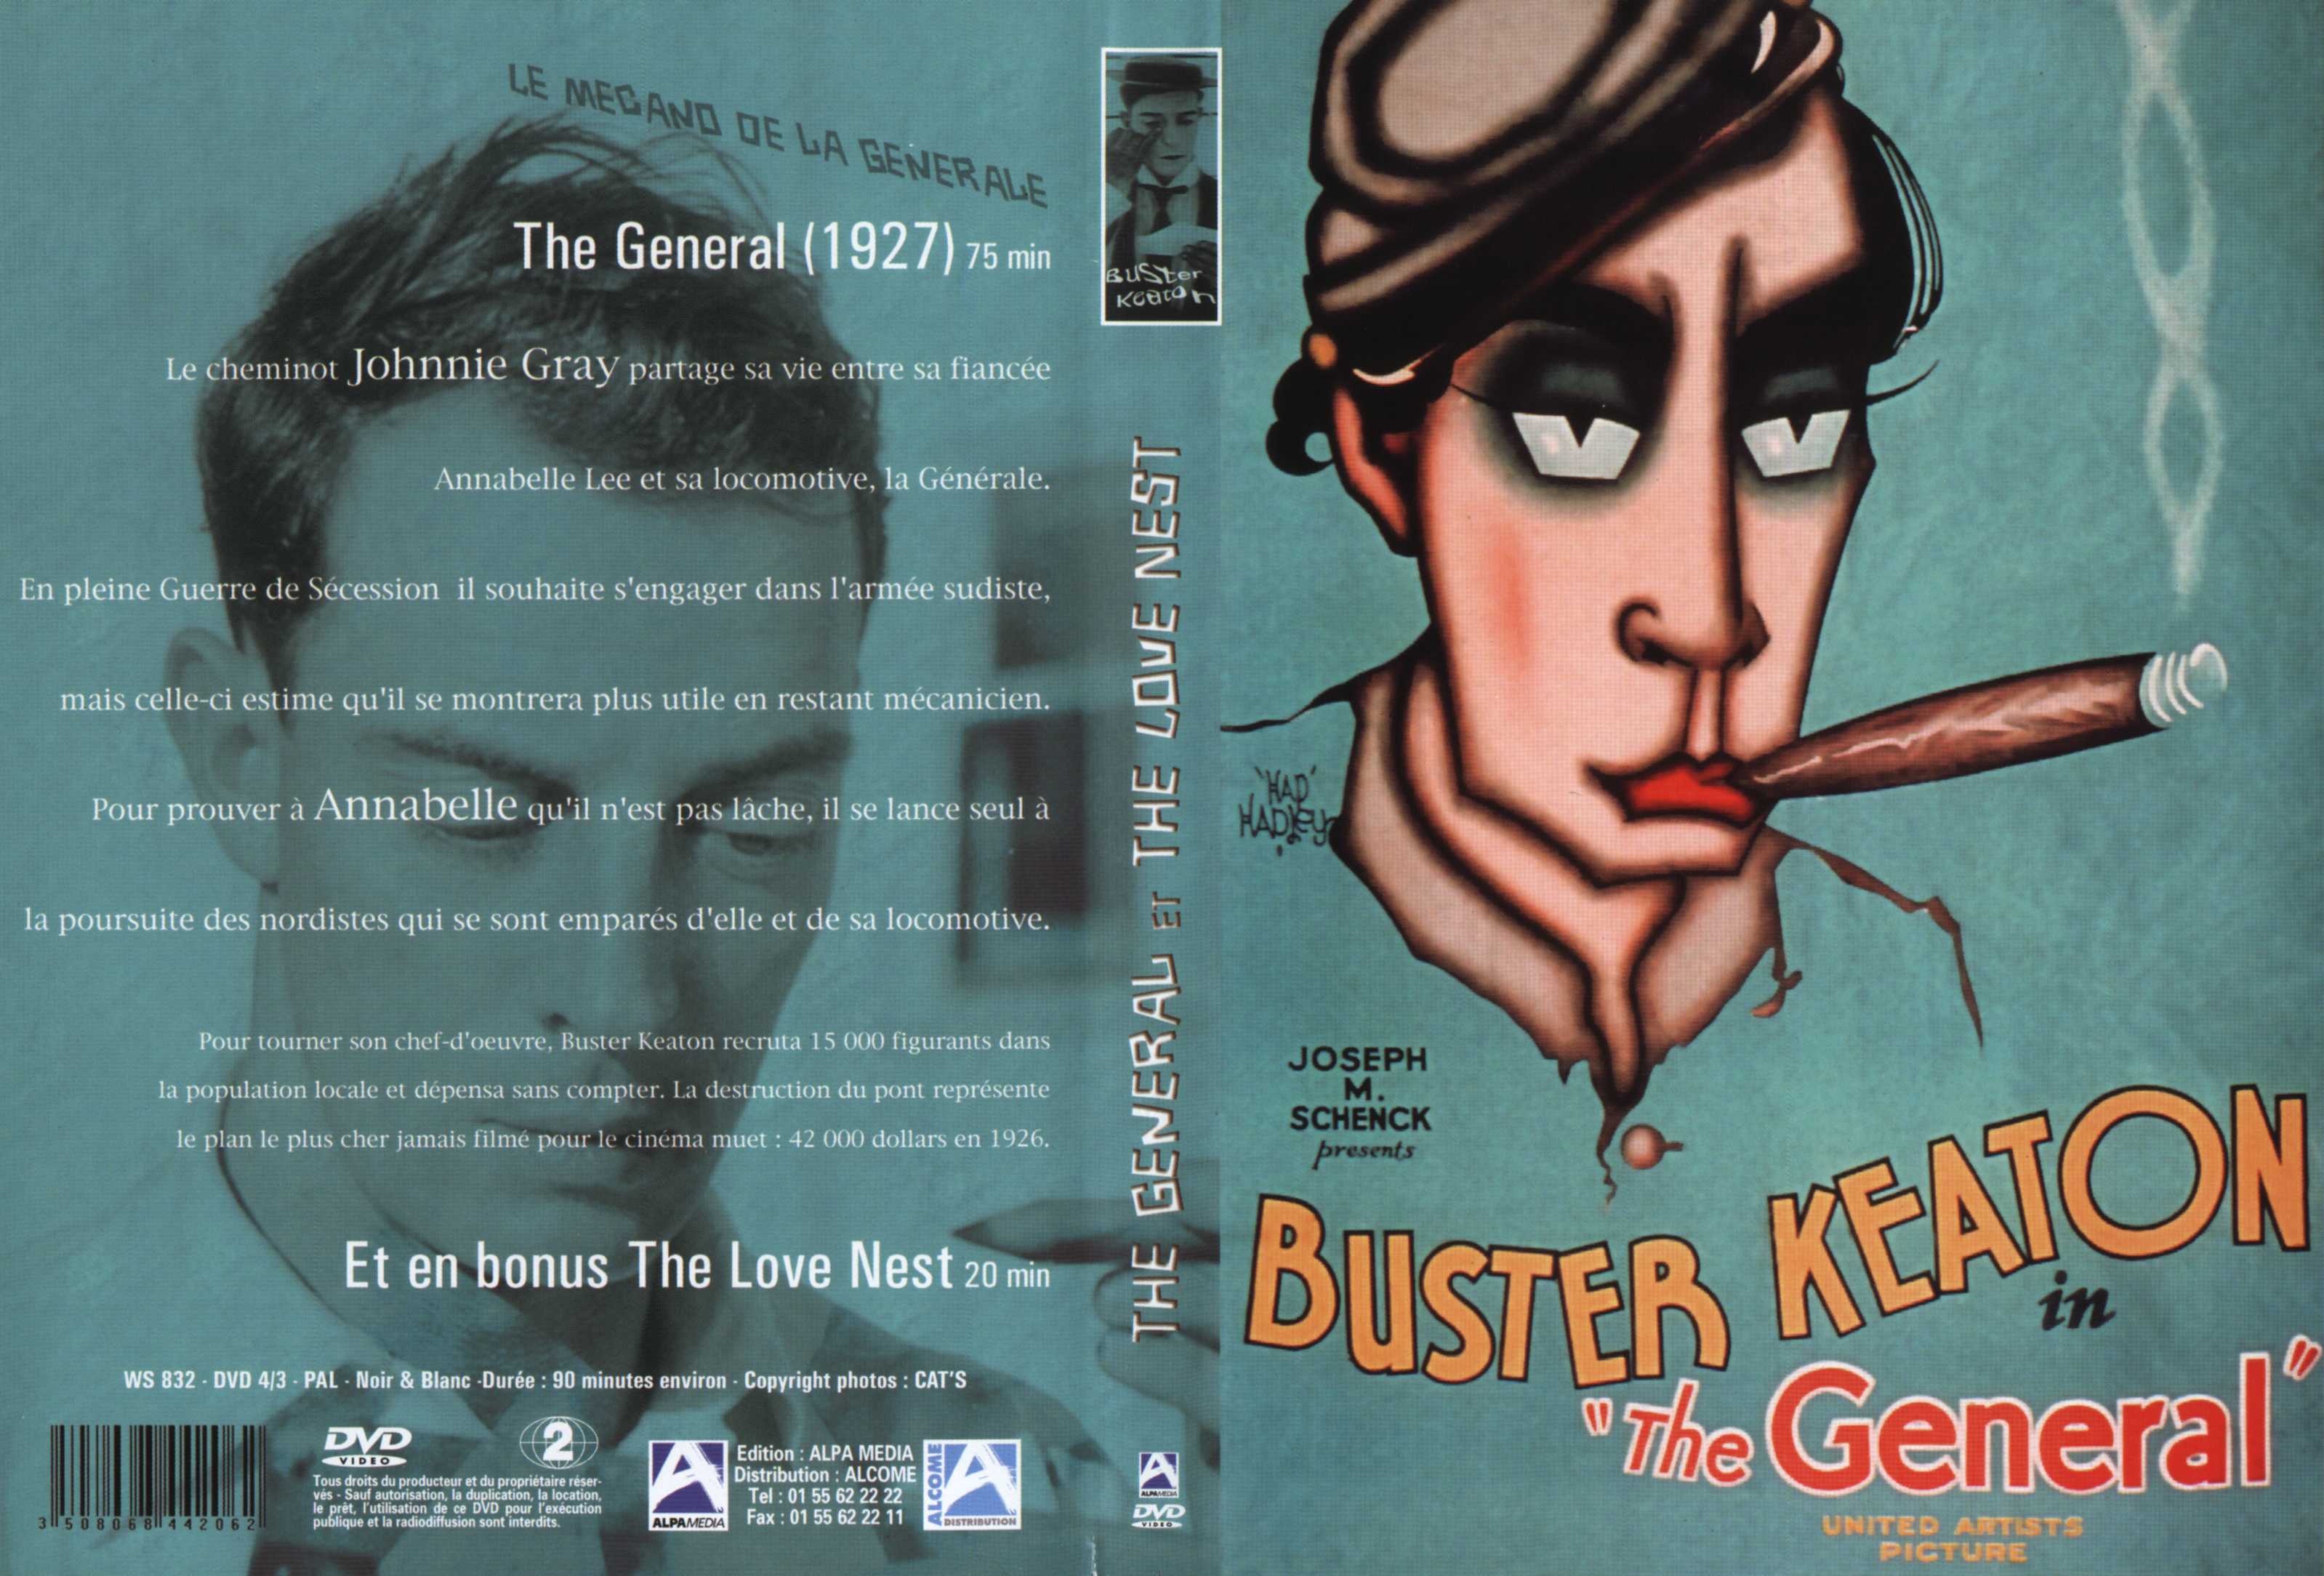 Jaquette DVD Buster Keaton the general